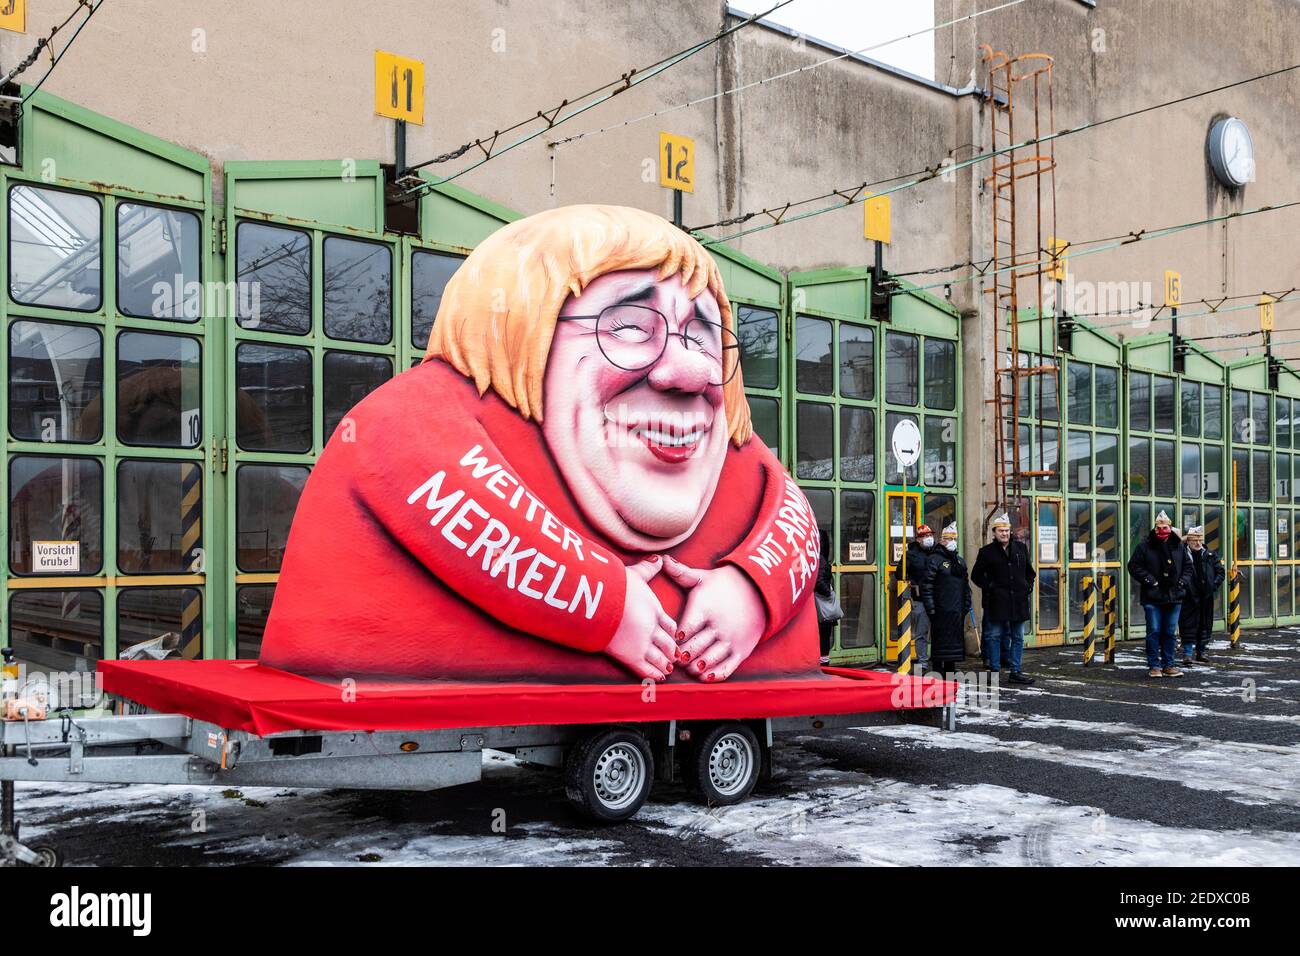 Dusseldorf, Germany. 15 February 2021. Effigy of German politician Armin Laschet who might replace Angela Merkel in the next general election. Carnival floats created by German artist Jacques Tilly were presented and later exhibited throughout Dusseldorf as the main carnival parade was cancelled due to the coronavirus pandemic. Credit: Bettina Strenske/Alamy Live News Stock Photo